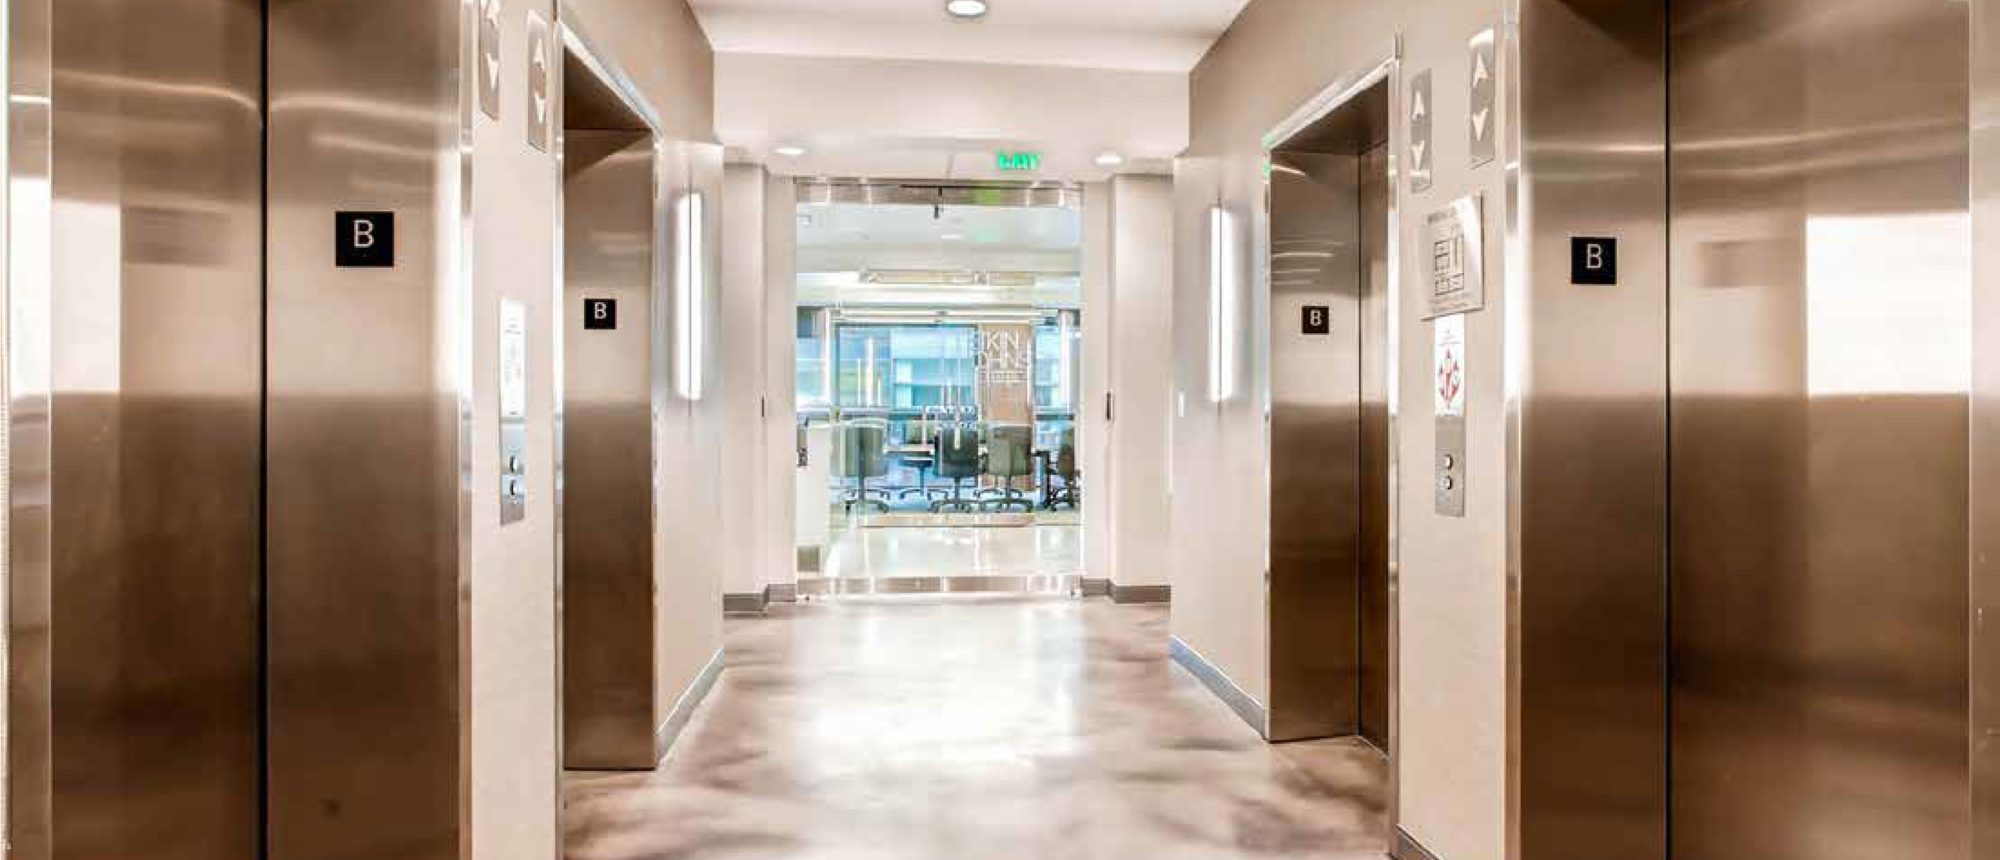 Writer Square elevator lobby with polished concrete floor.